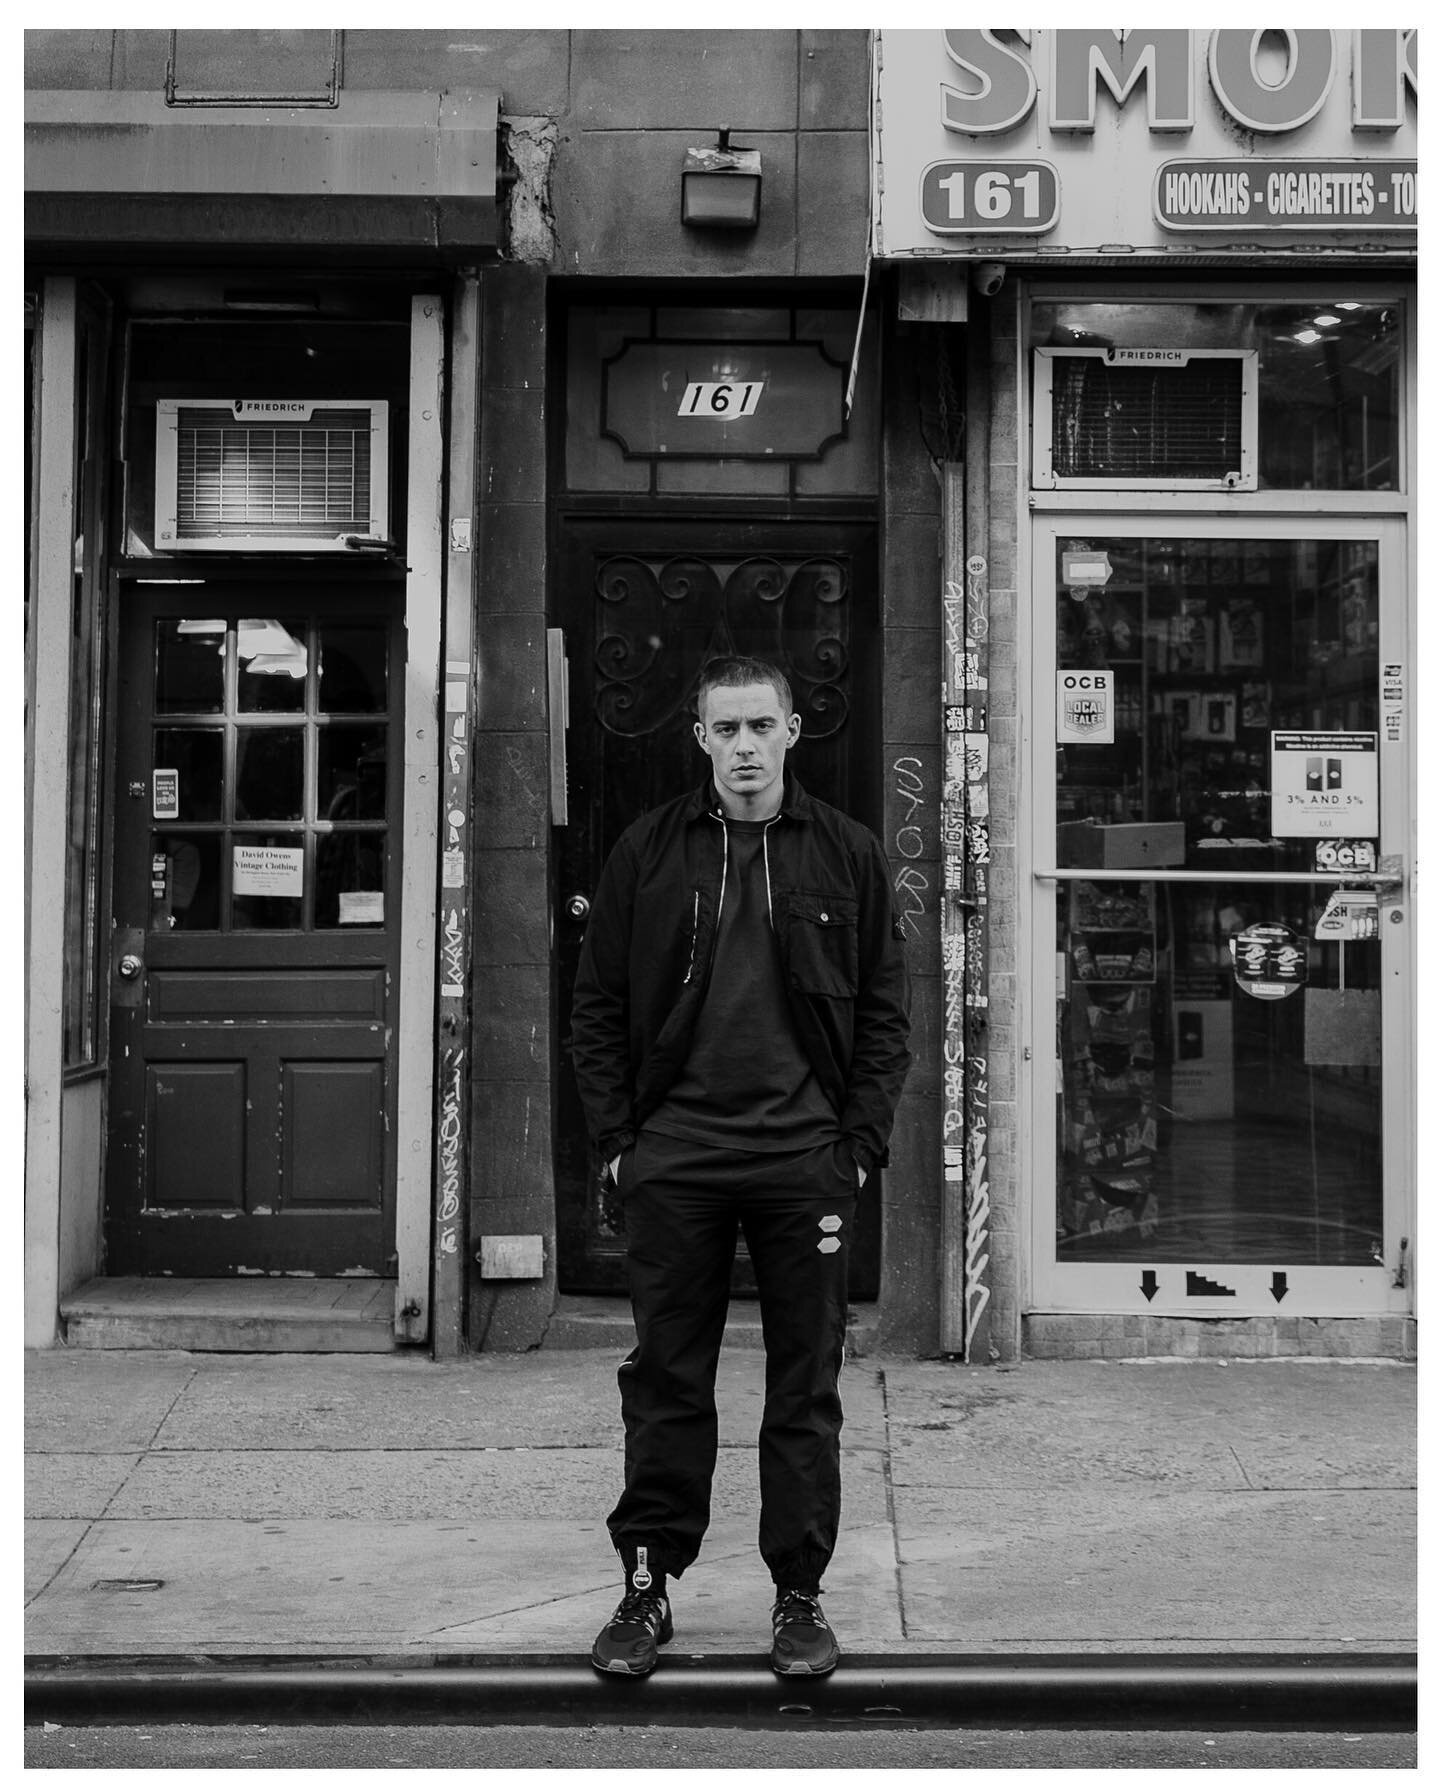 Dermot in New York early last year.
He was writing and recording his debut album and I was there for a few days to document some of the process. This photo was taken on the Lower East Side on a day off from the studio and the day before the Lost vide